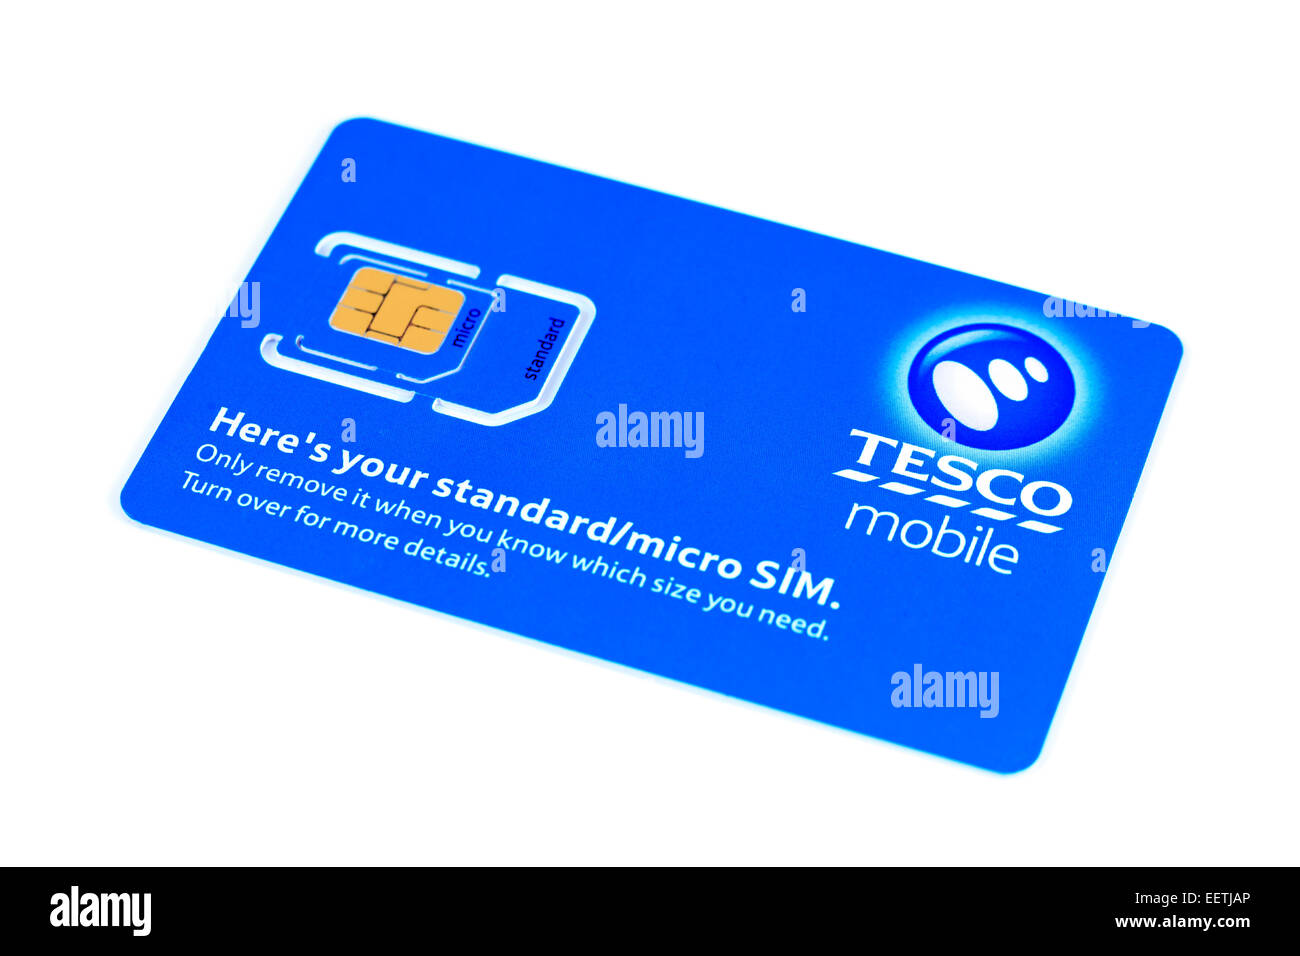 Tesco mobile SIM card with standard and nocro sim Stock Photo